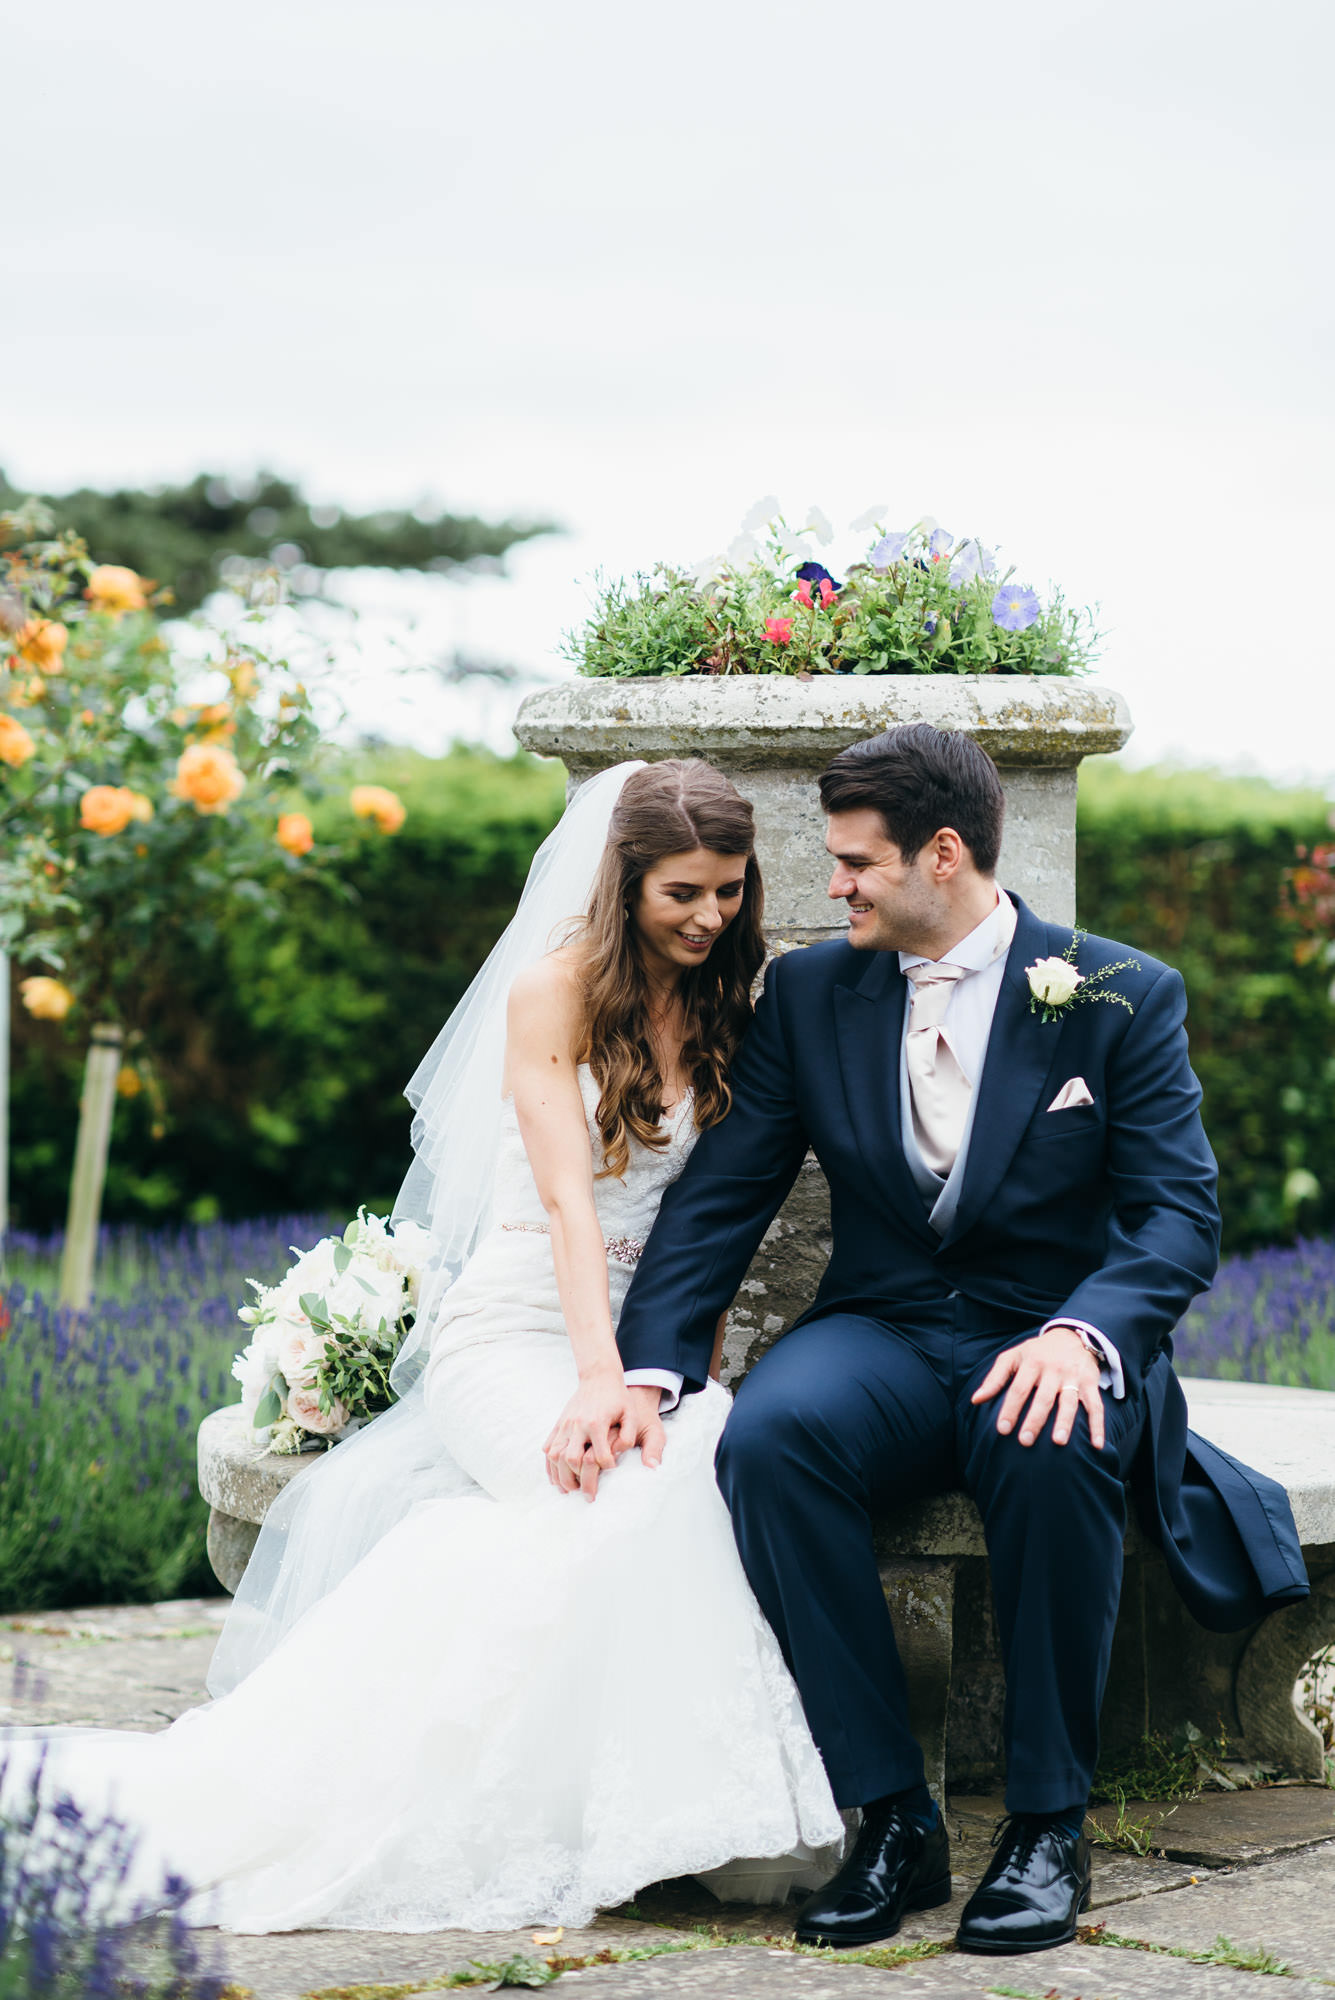 Wedding photography at St donats castle 